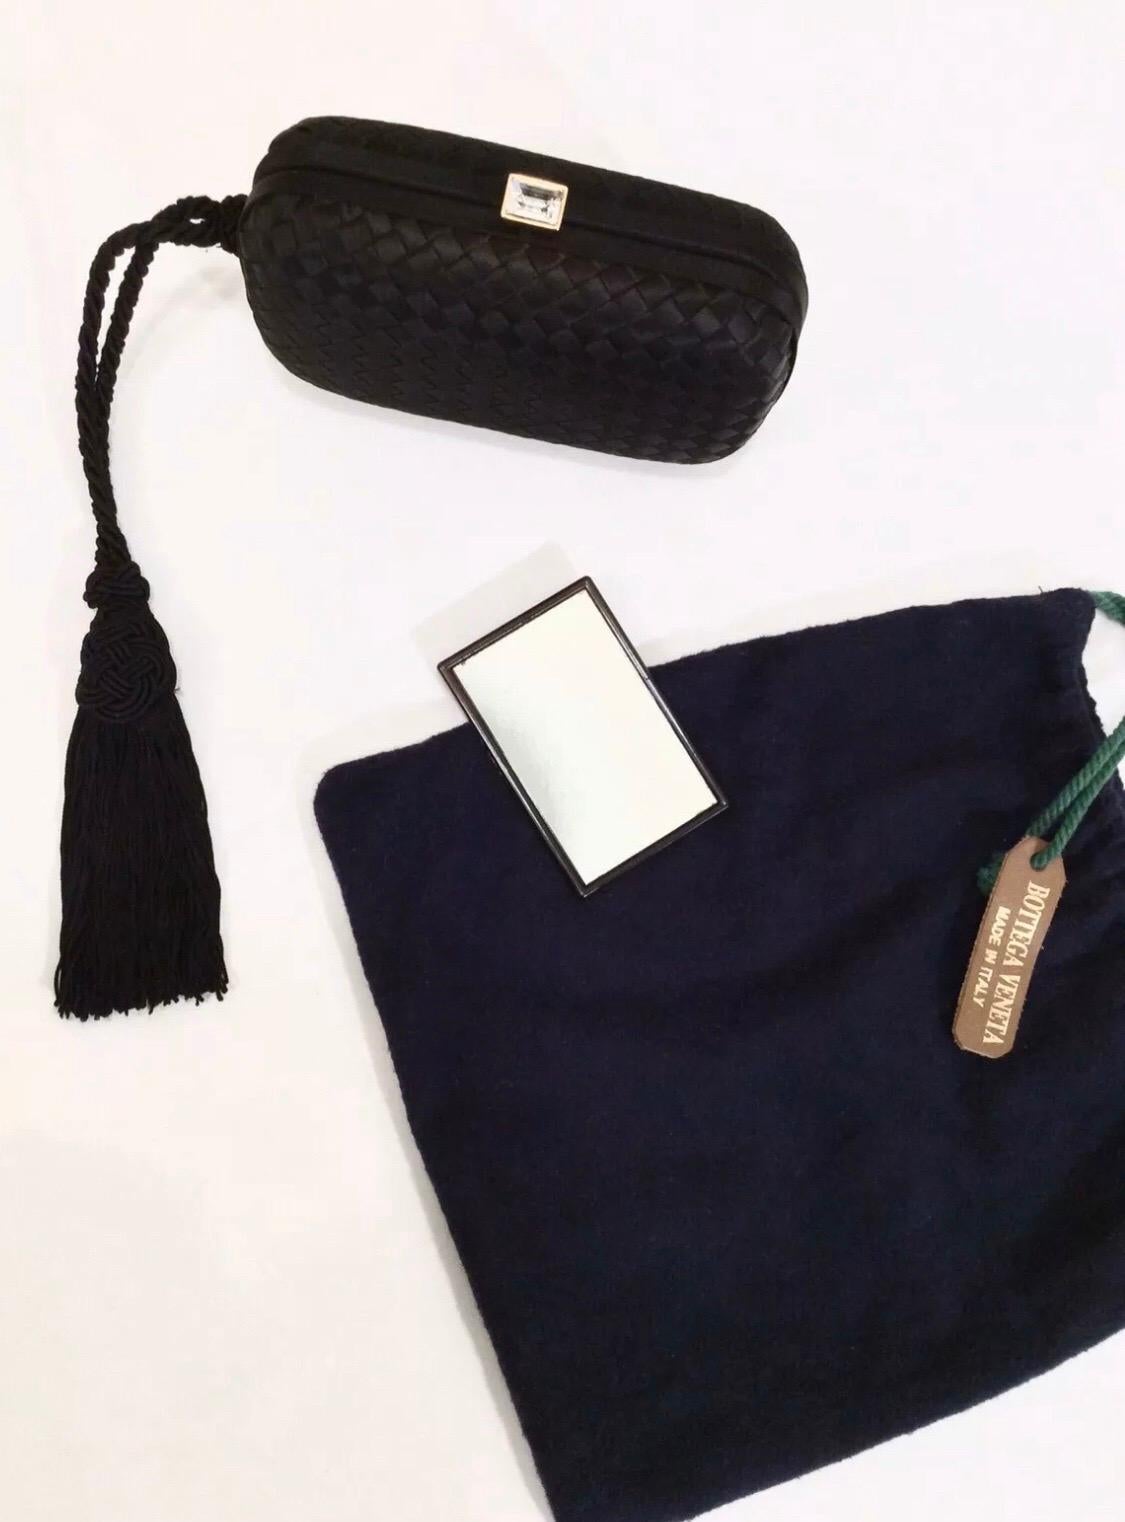 Elevate your evening look with this Bottega clutch! Circa 1980s, this clutch is crafted from black silk and features Bottega's signature woven pattern. Clutch includes a free hanging side tassel and a gold plated press lock closure with a center